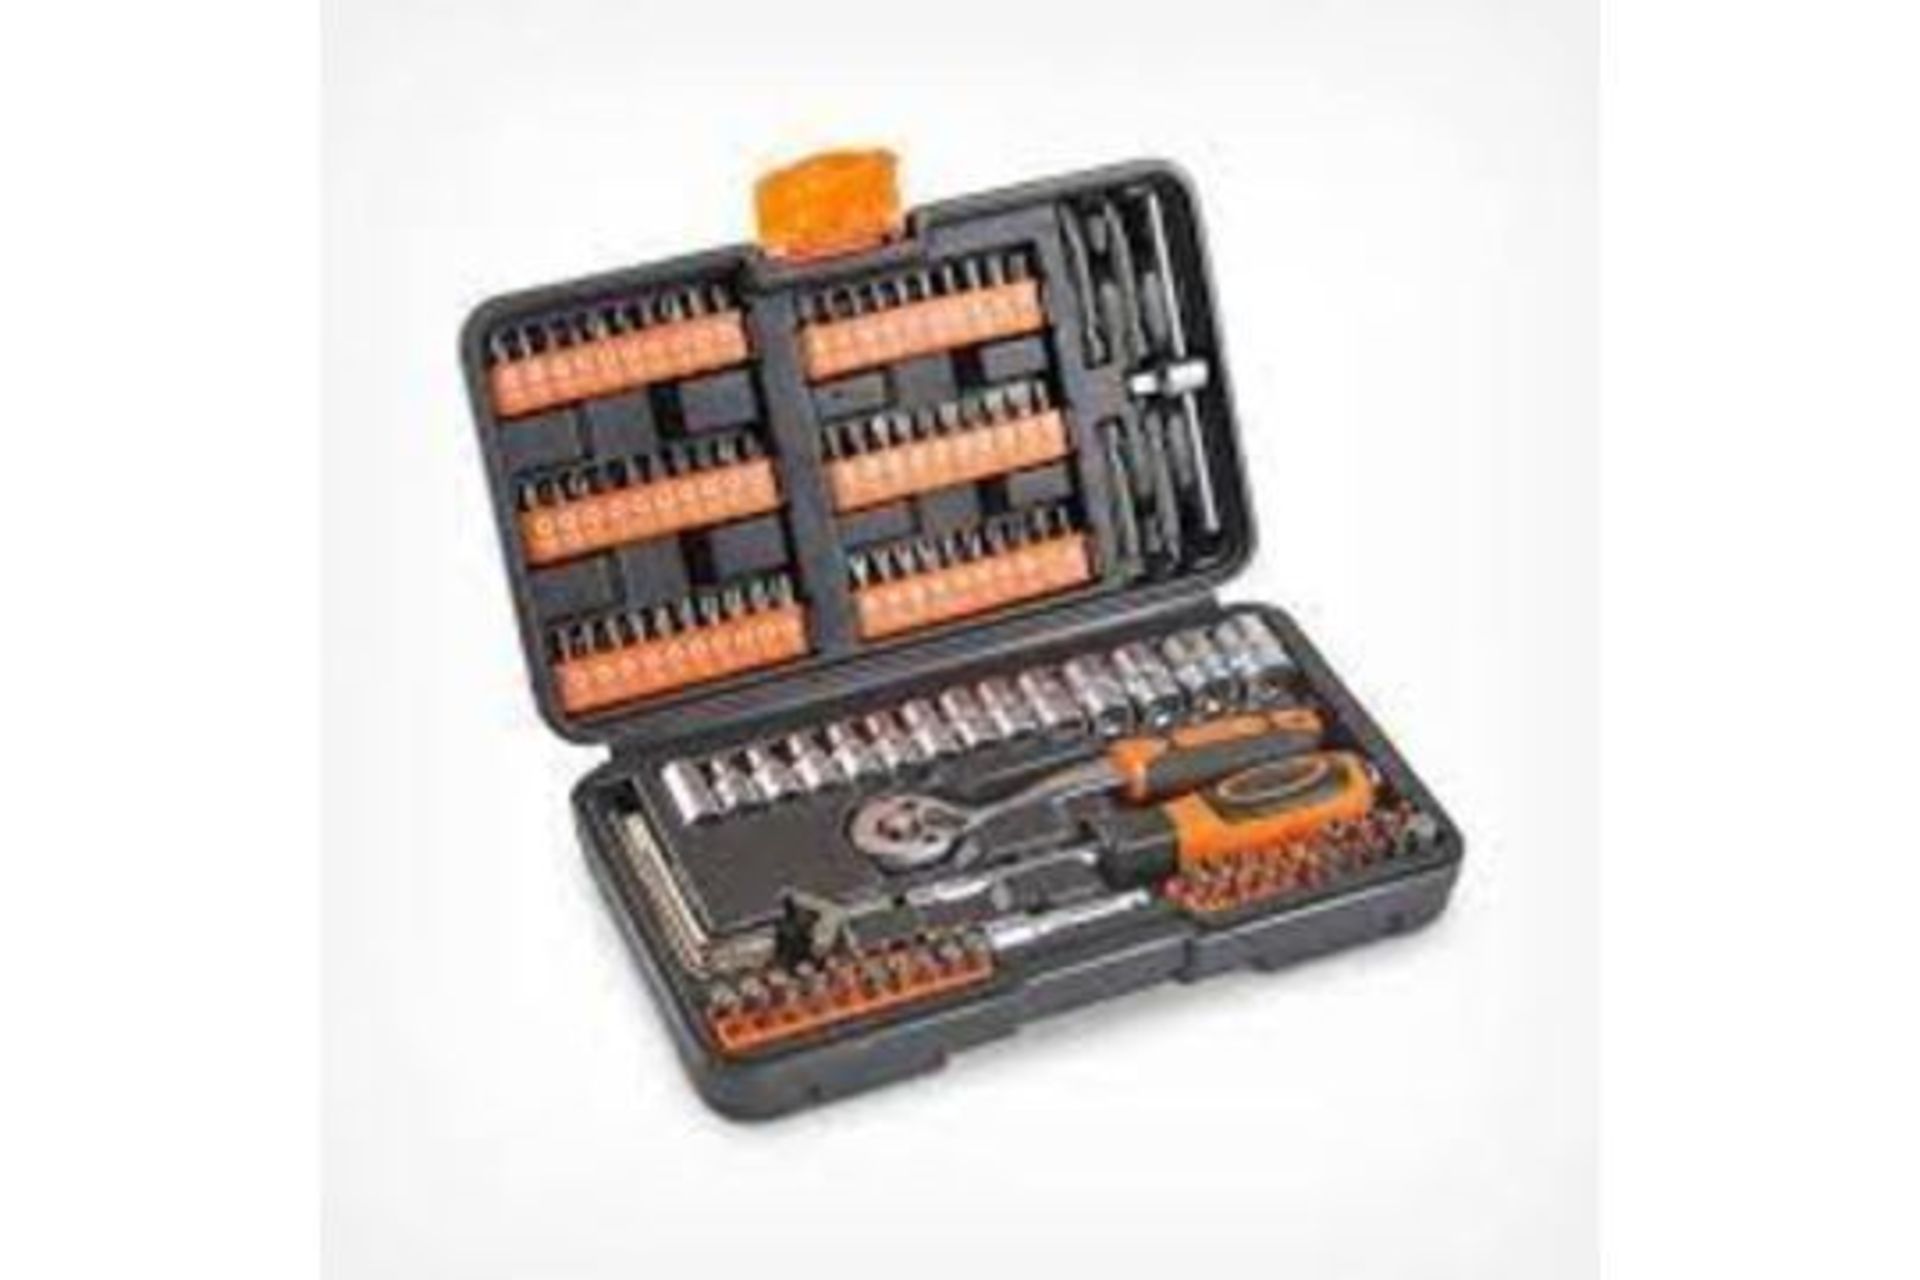 2 x New Boxed 130pc Socket + Bit Sets. (REF176-OFC) Be prepared for the unexpected with the 130pc